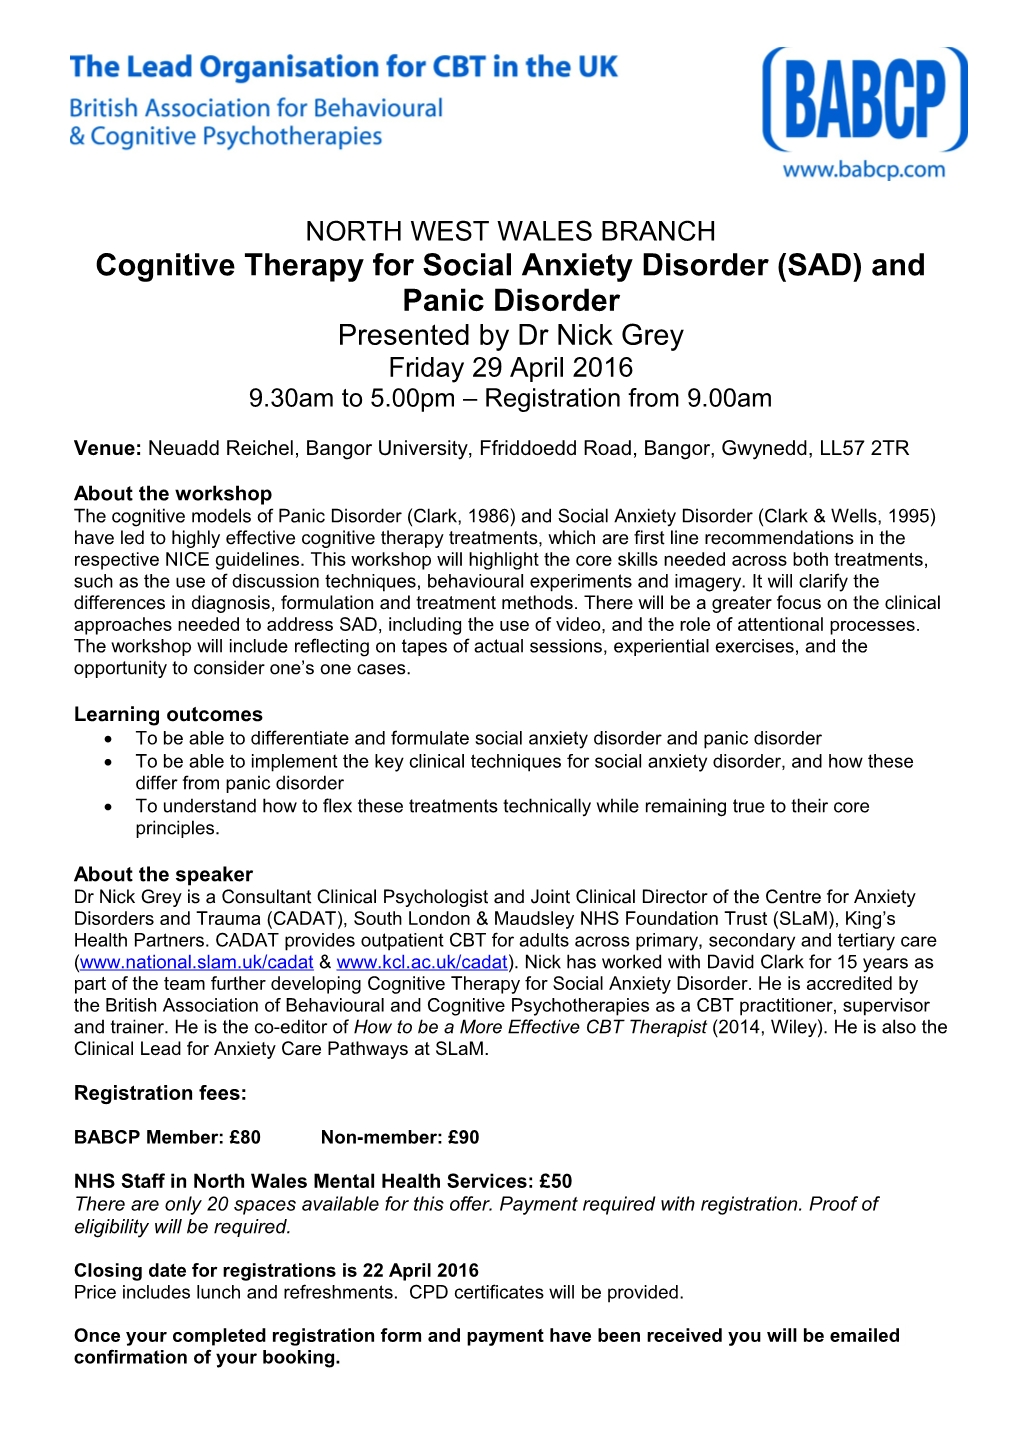 Cognitive Therapy for Social Anxiety Disorder (SAD) and Panic Disorder